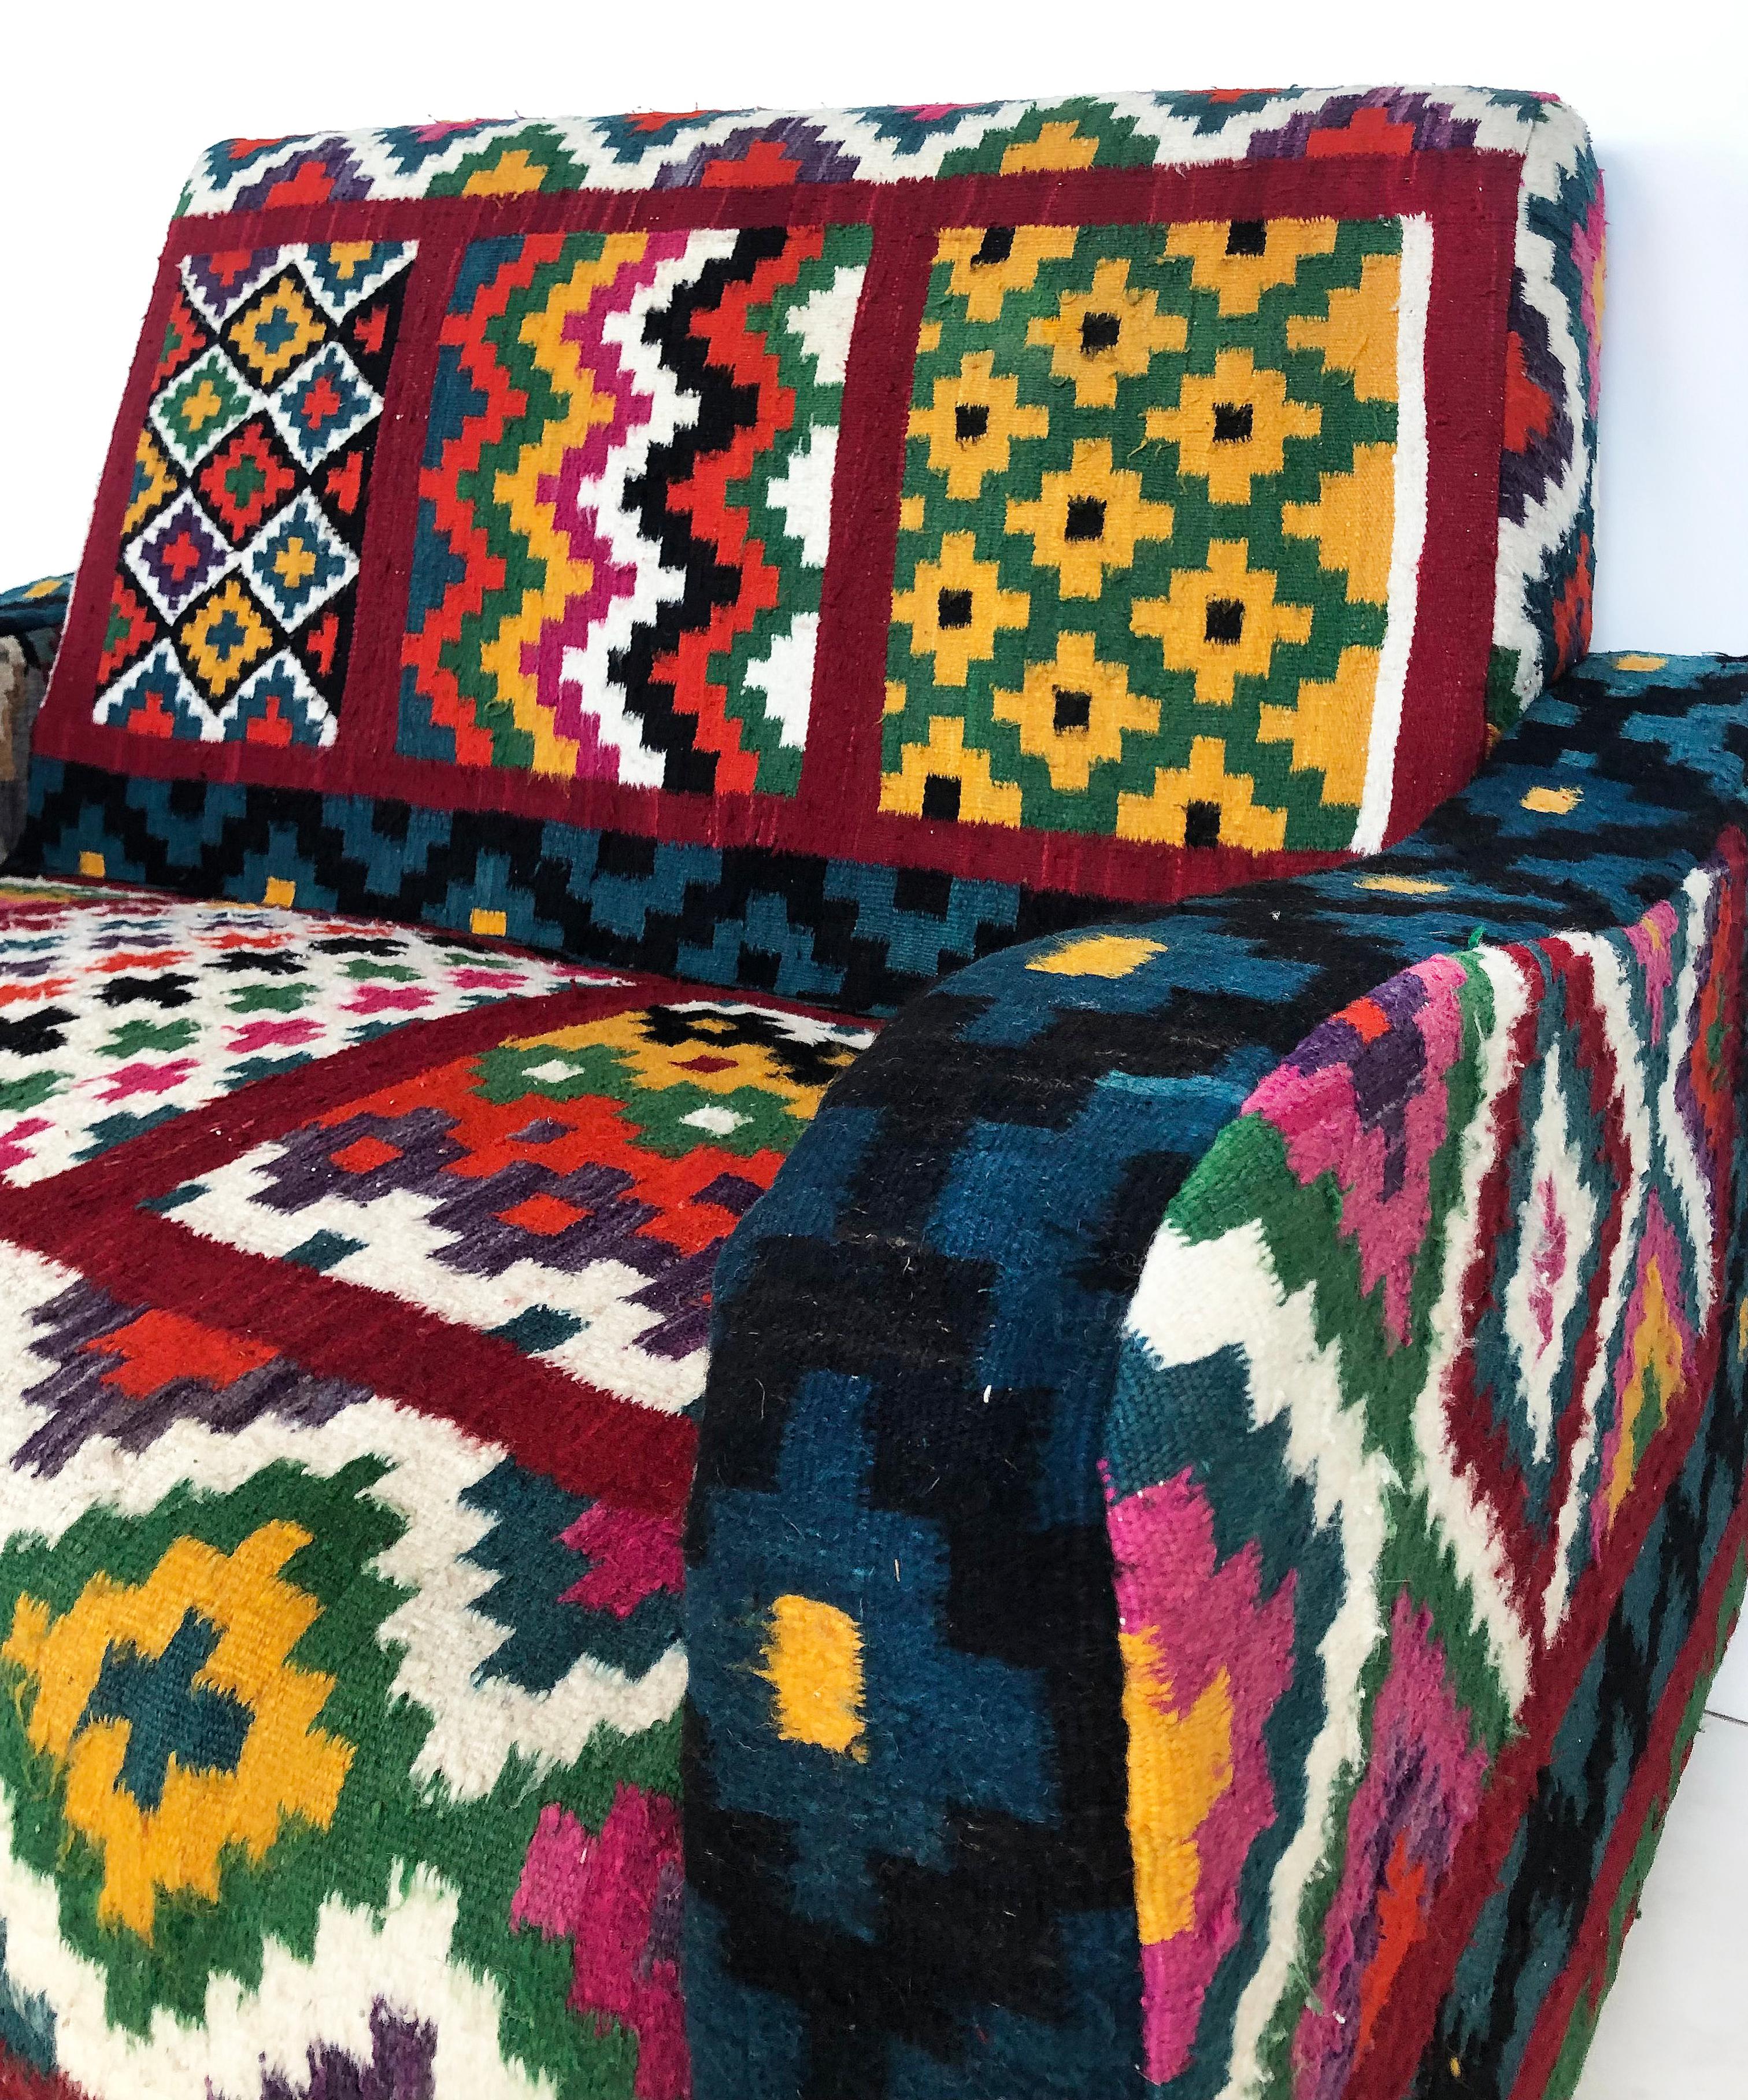 Tunisian 'North Africa' Woven Wool Textile Loveseat with Brightly Colored Fabric 2